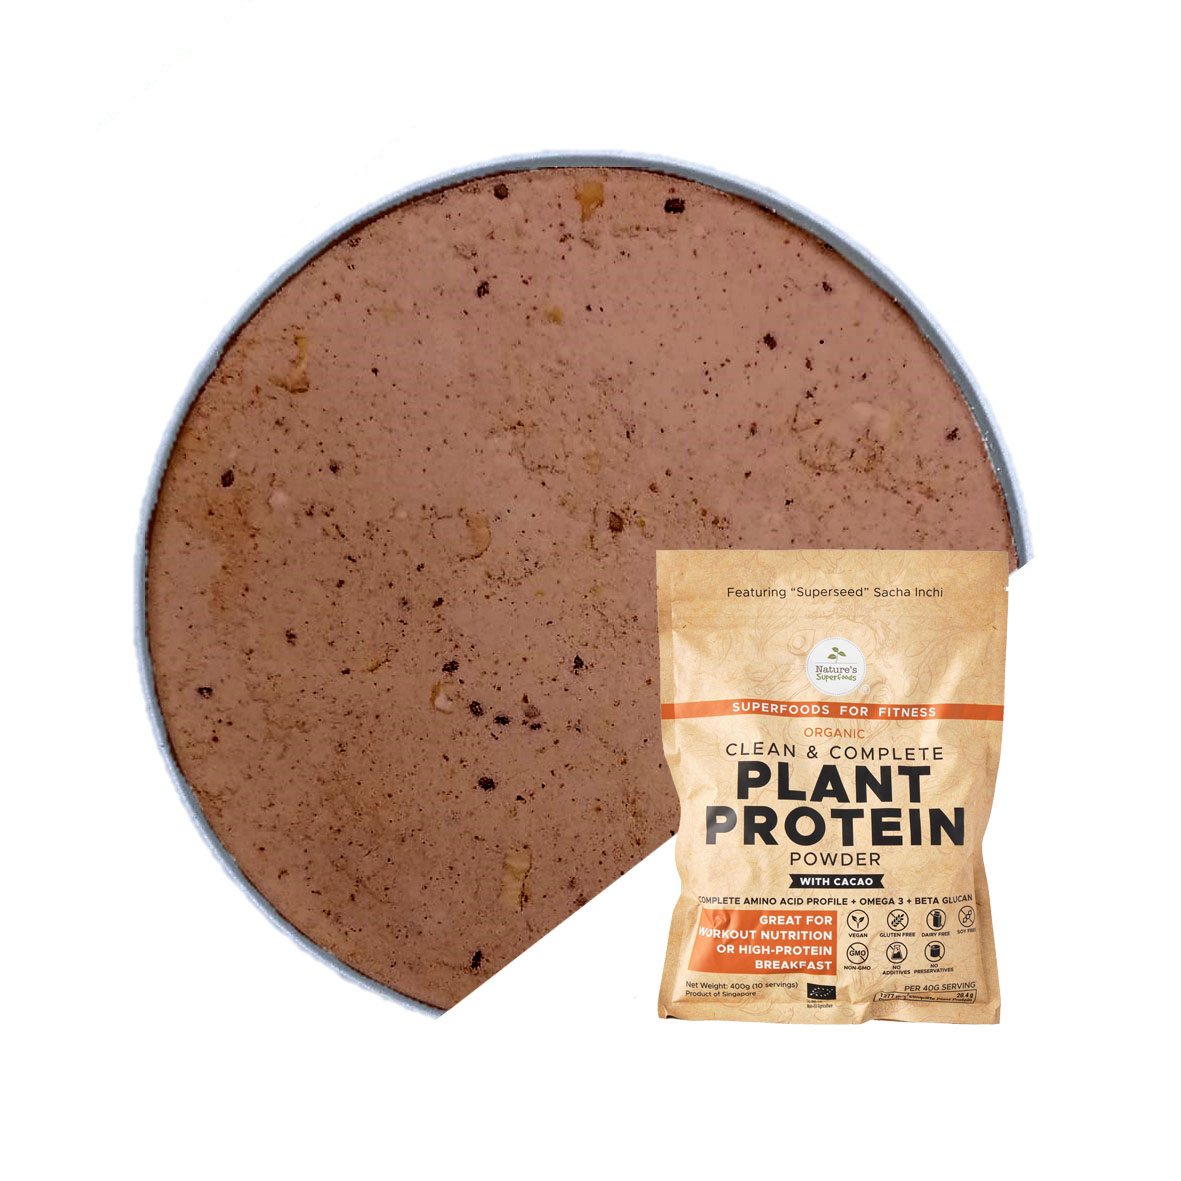 Organic Plant Protein Powder (with Cacao)